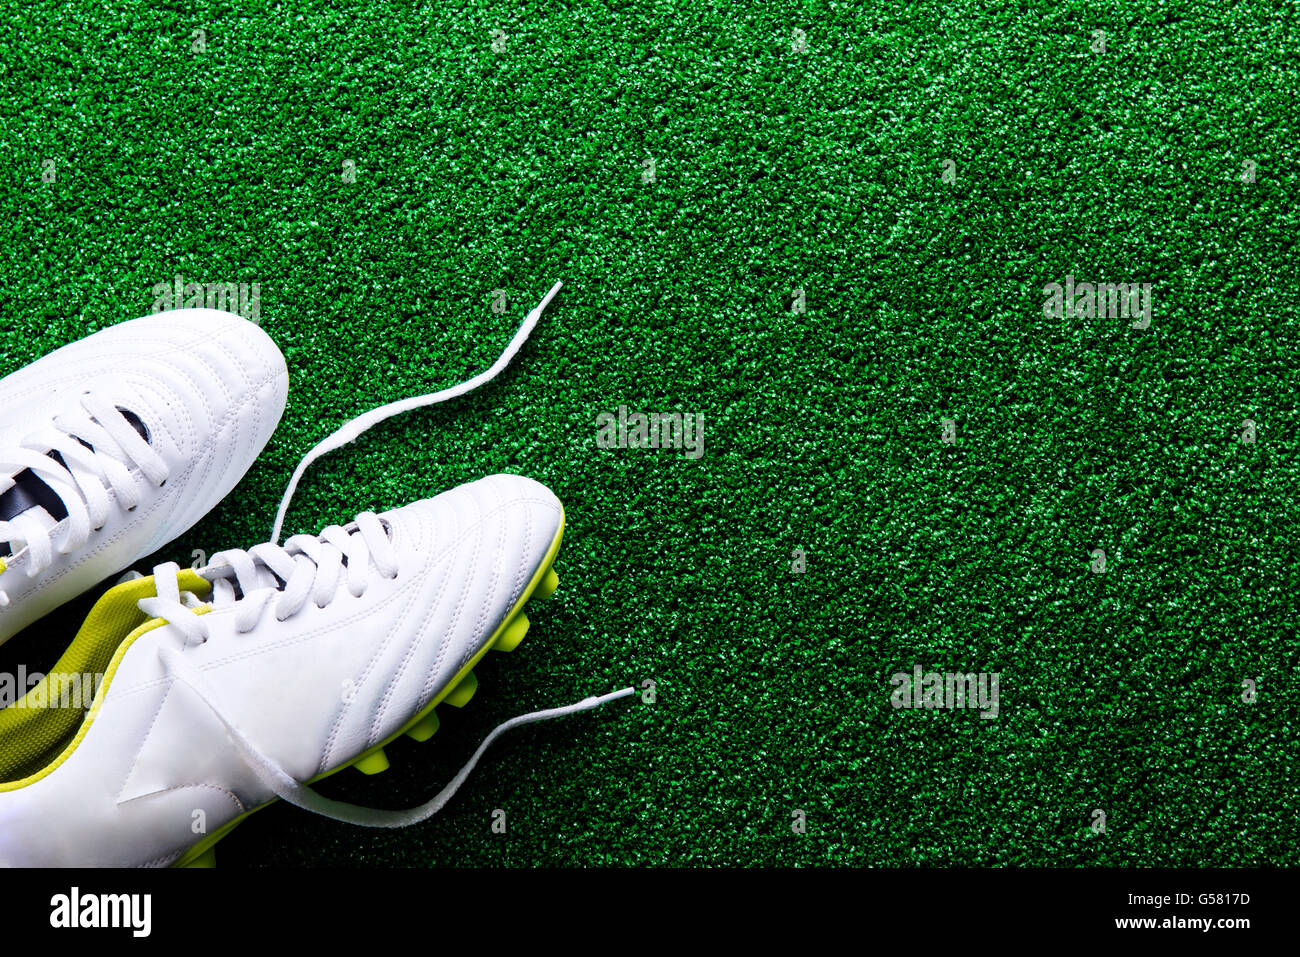 artificial turf cleats